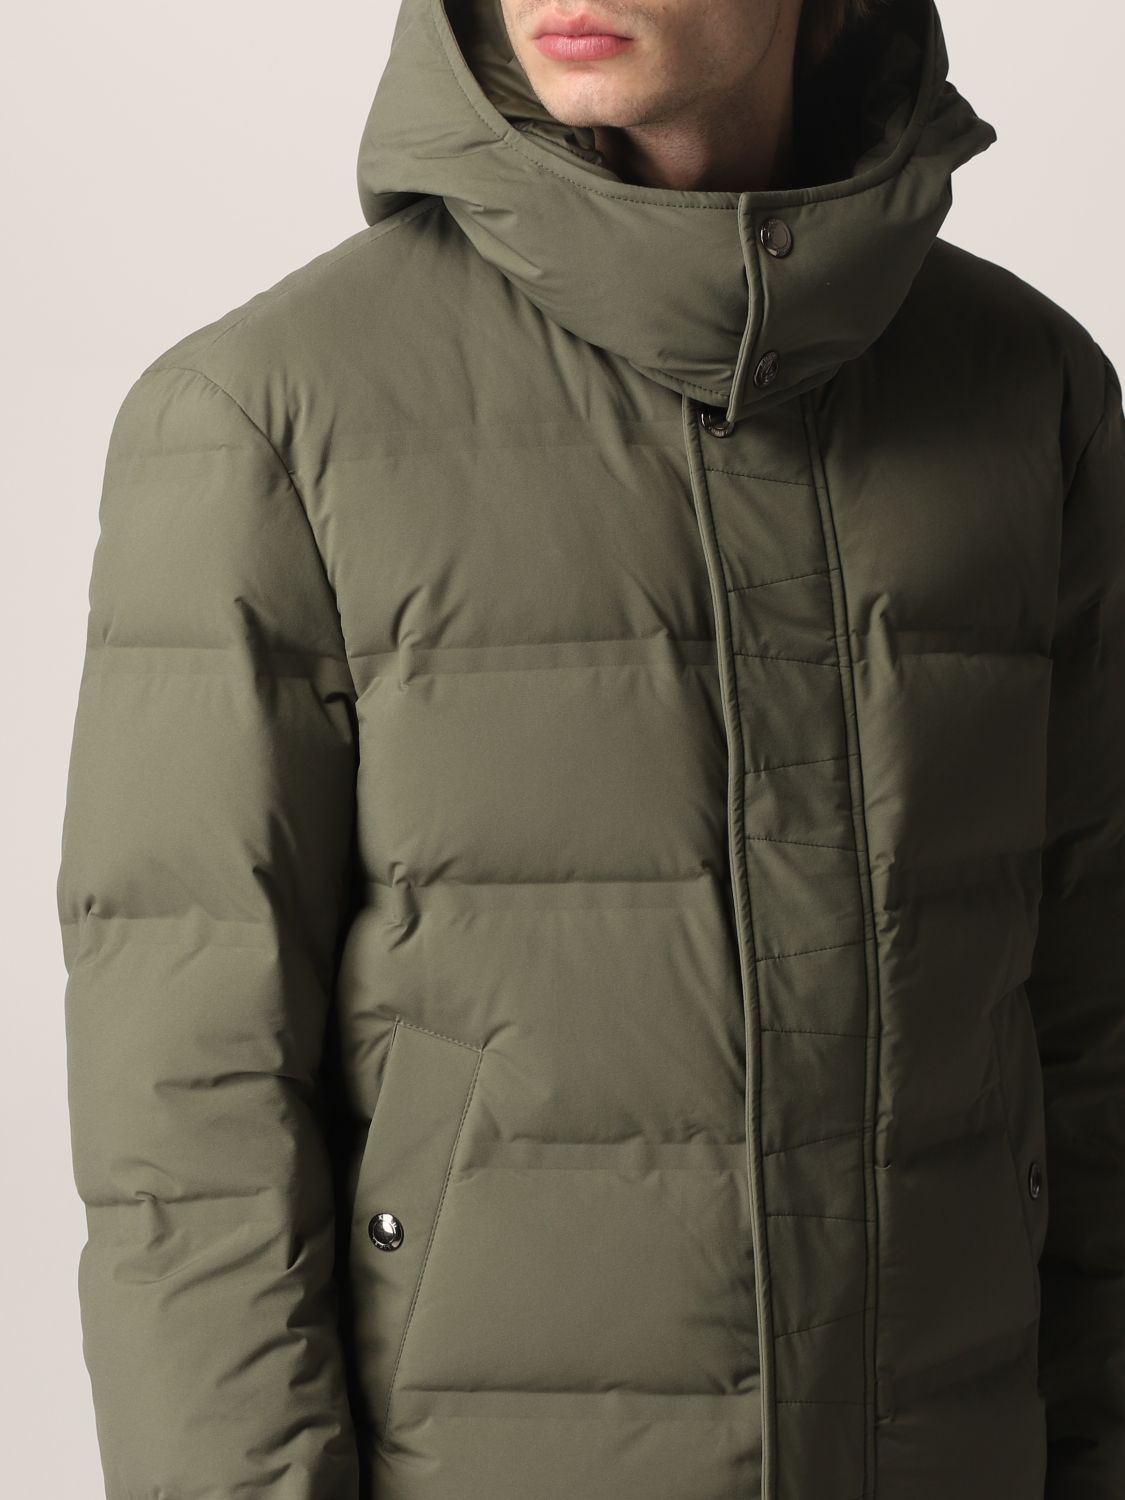 KIRED: down jacket in quilted nylon - Green | Kired jacket ...